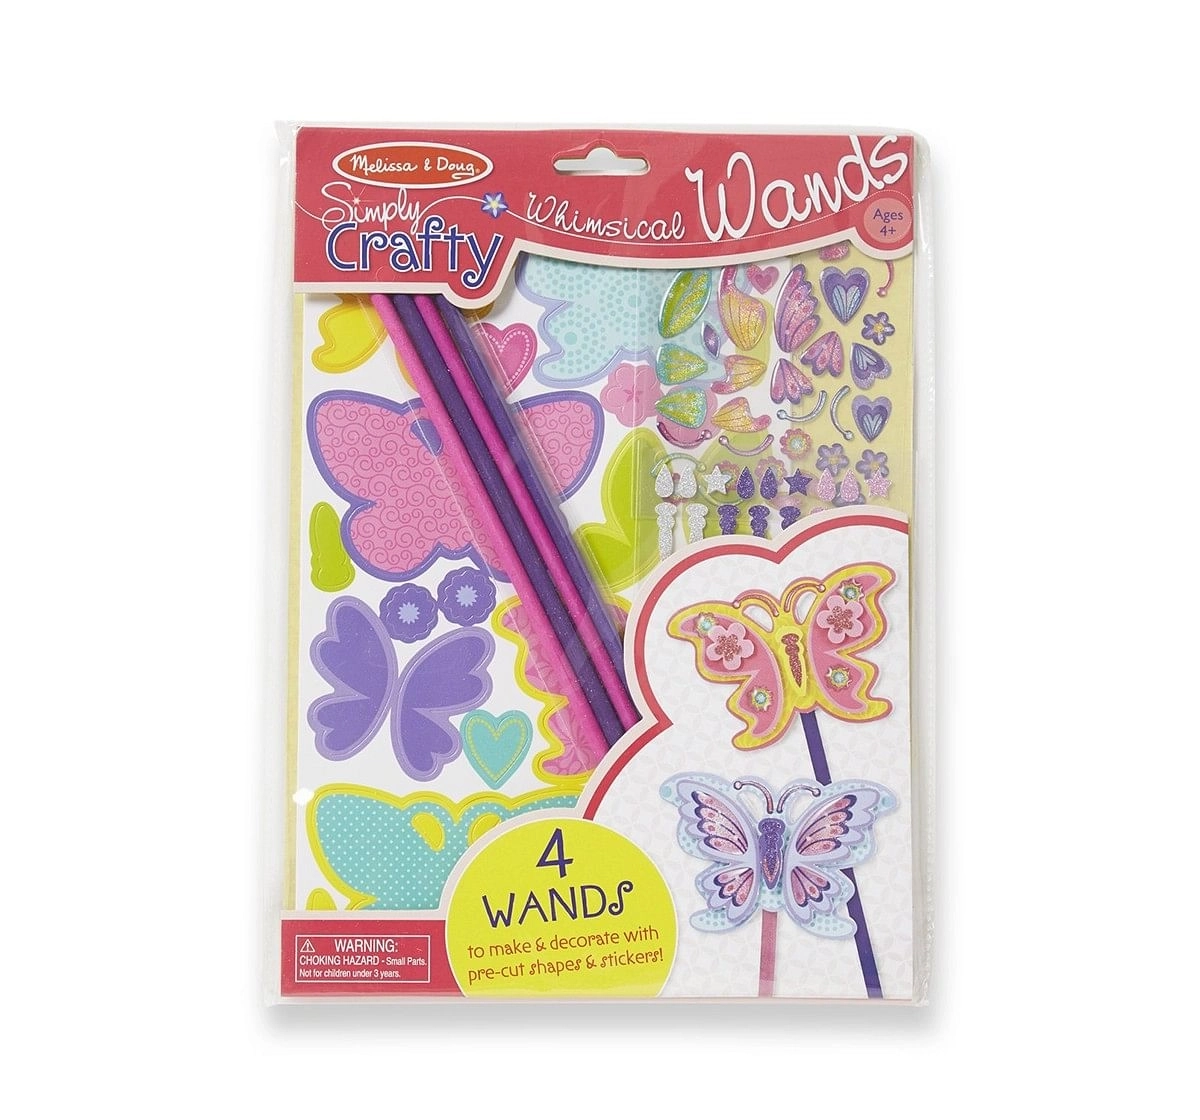 Melissa & Doug Simply Crafty - Whimsical Wands, Multi Color DIY Art & Craft Kits for Kids age 4Y+ 